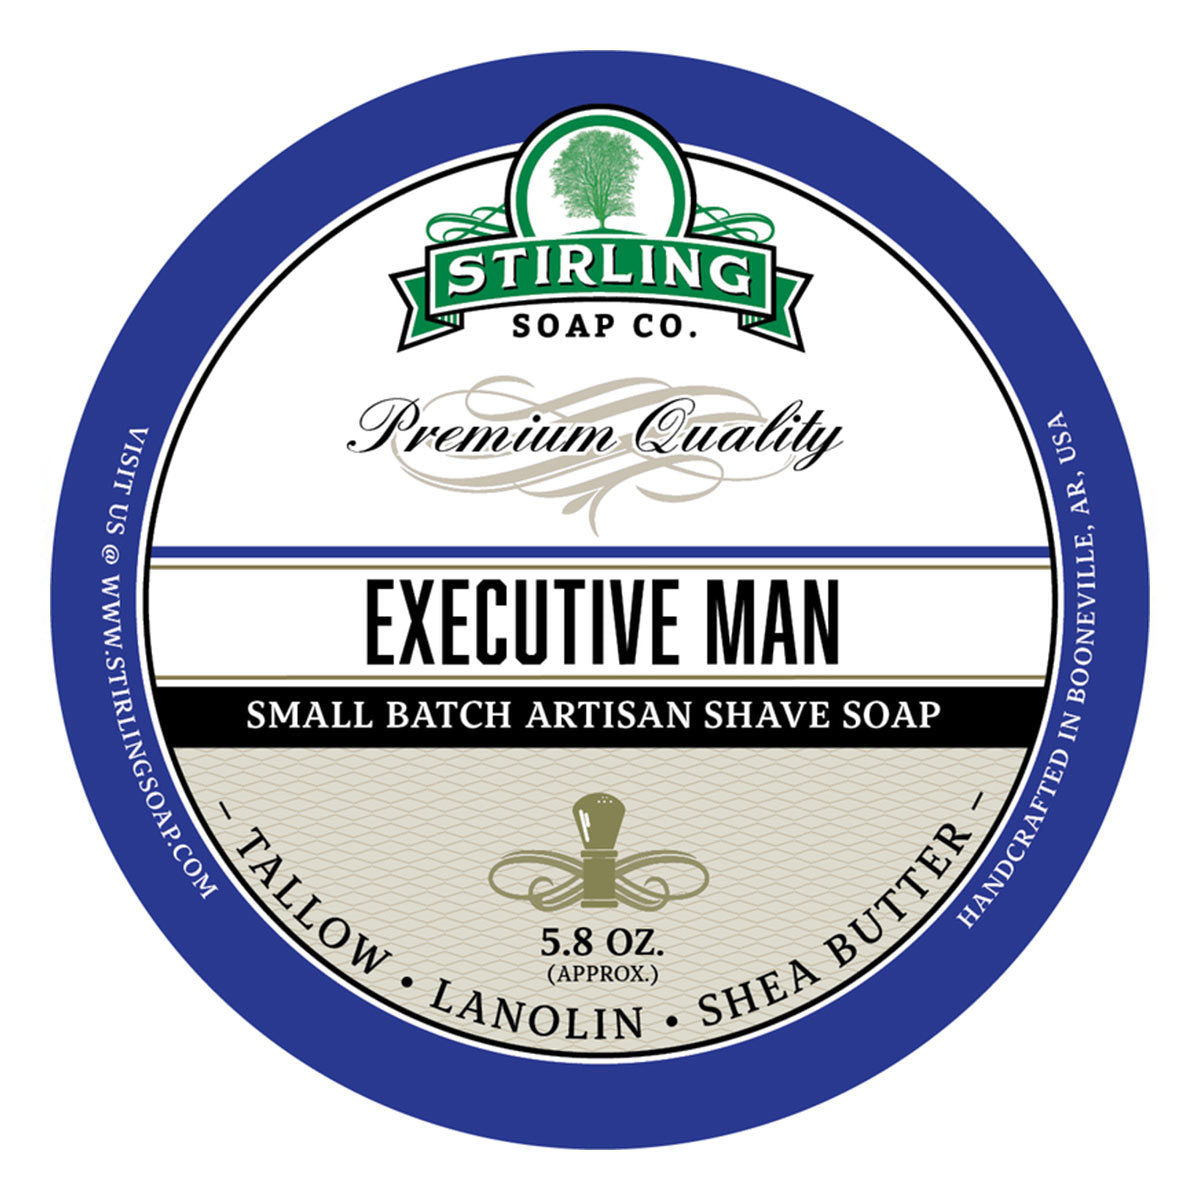 Primary image of Executive Man Shave Soap